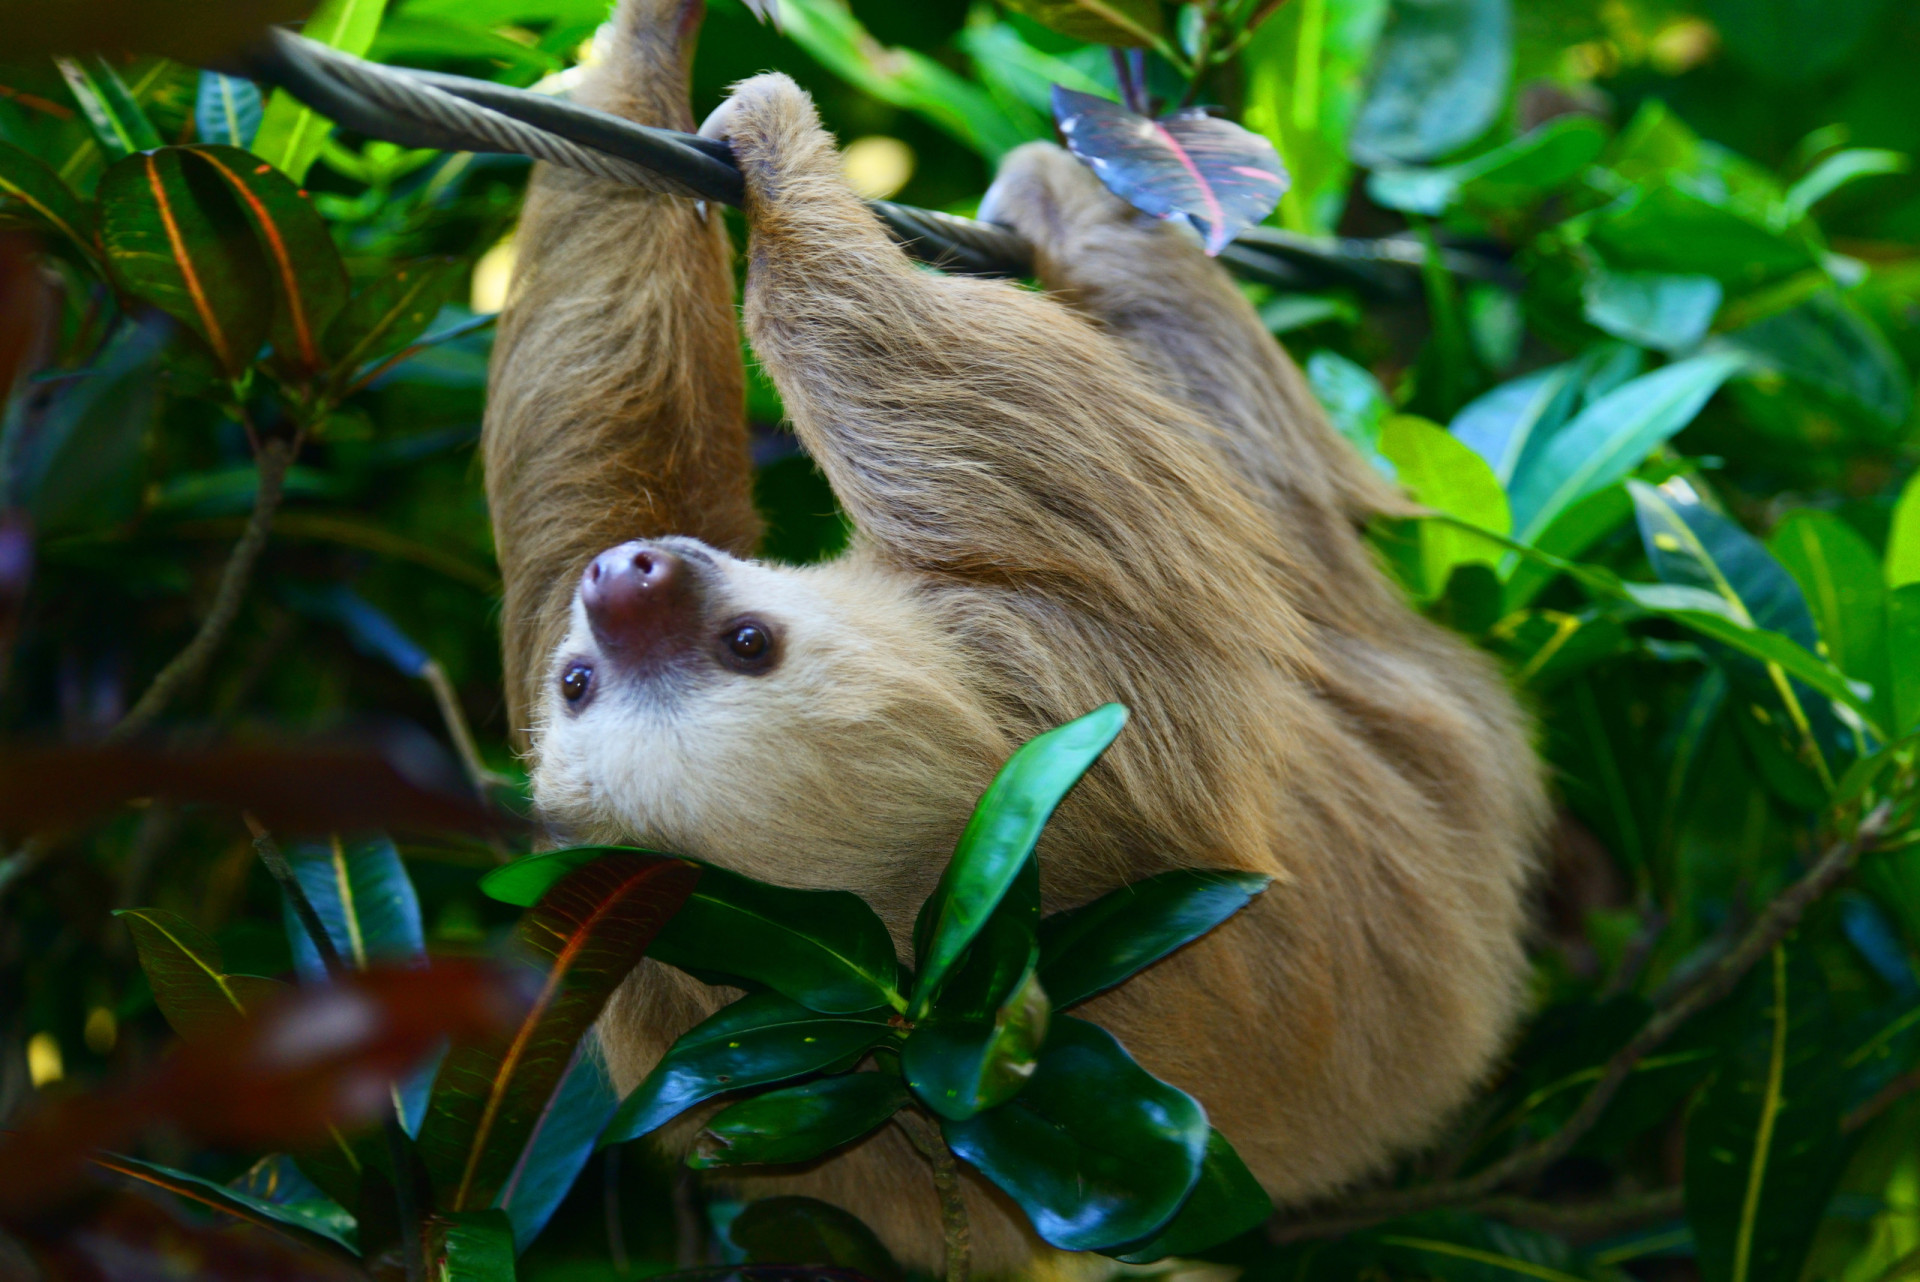 <p>This fabulous ecosystem protects Costa Rica's best coral reef formations and the massive trees of the lowland Atlantic tropical rainforest and their inhabitants, the residents of which include the long-limbed two-toed sloth (pictured).</p><p>You may also like:<a href="https://www.starsinsider.com/n/281580?utm_source=msn.com&utm_medium=display&utm_campaign=referral_description&utm_content=627756en-en"> The most dangerous online celebrities</a></p>